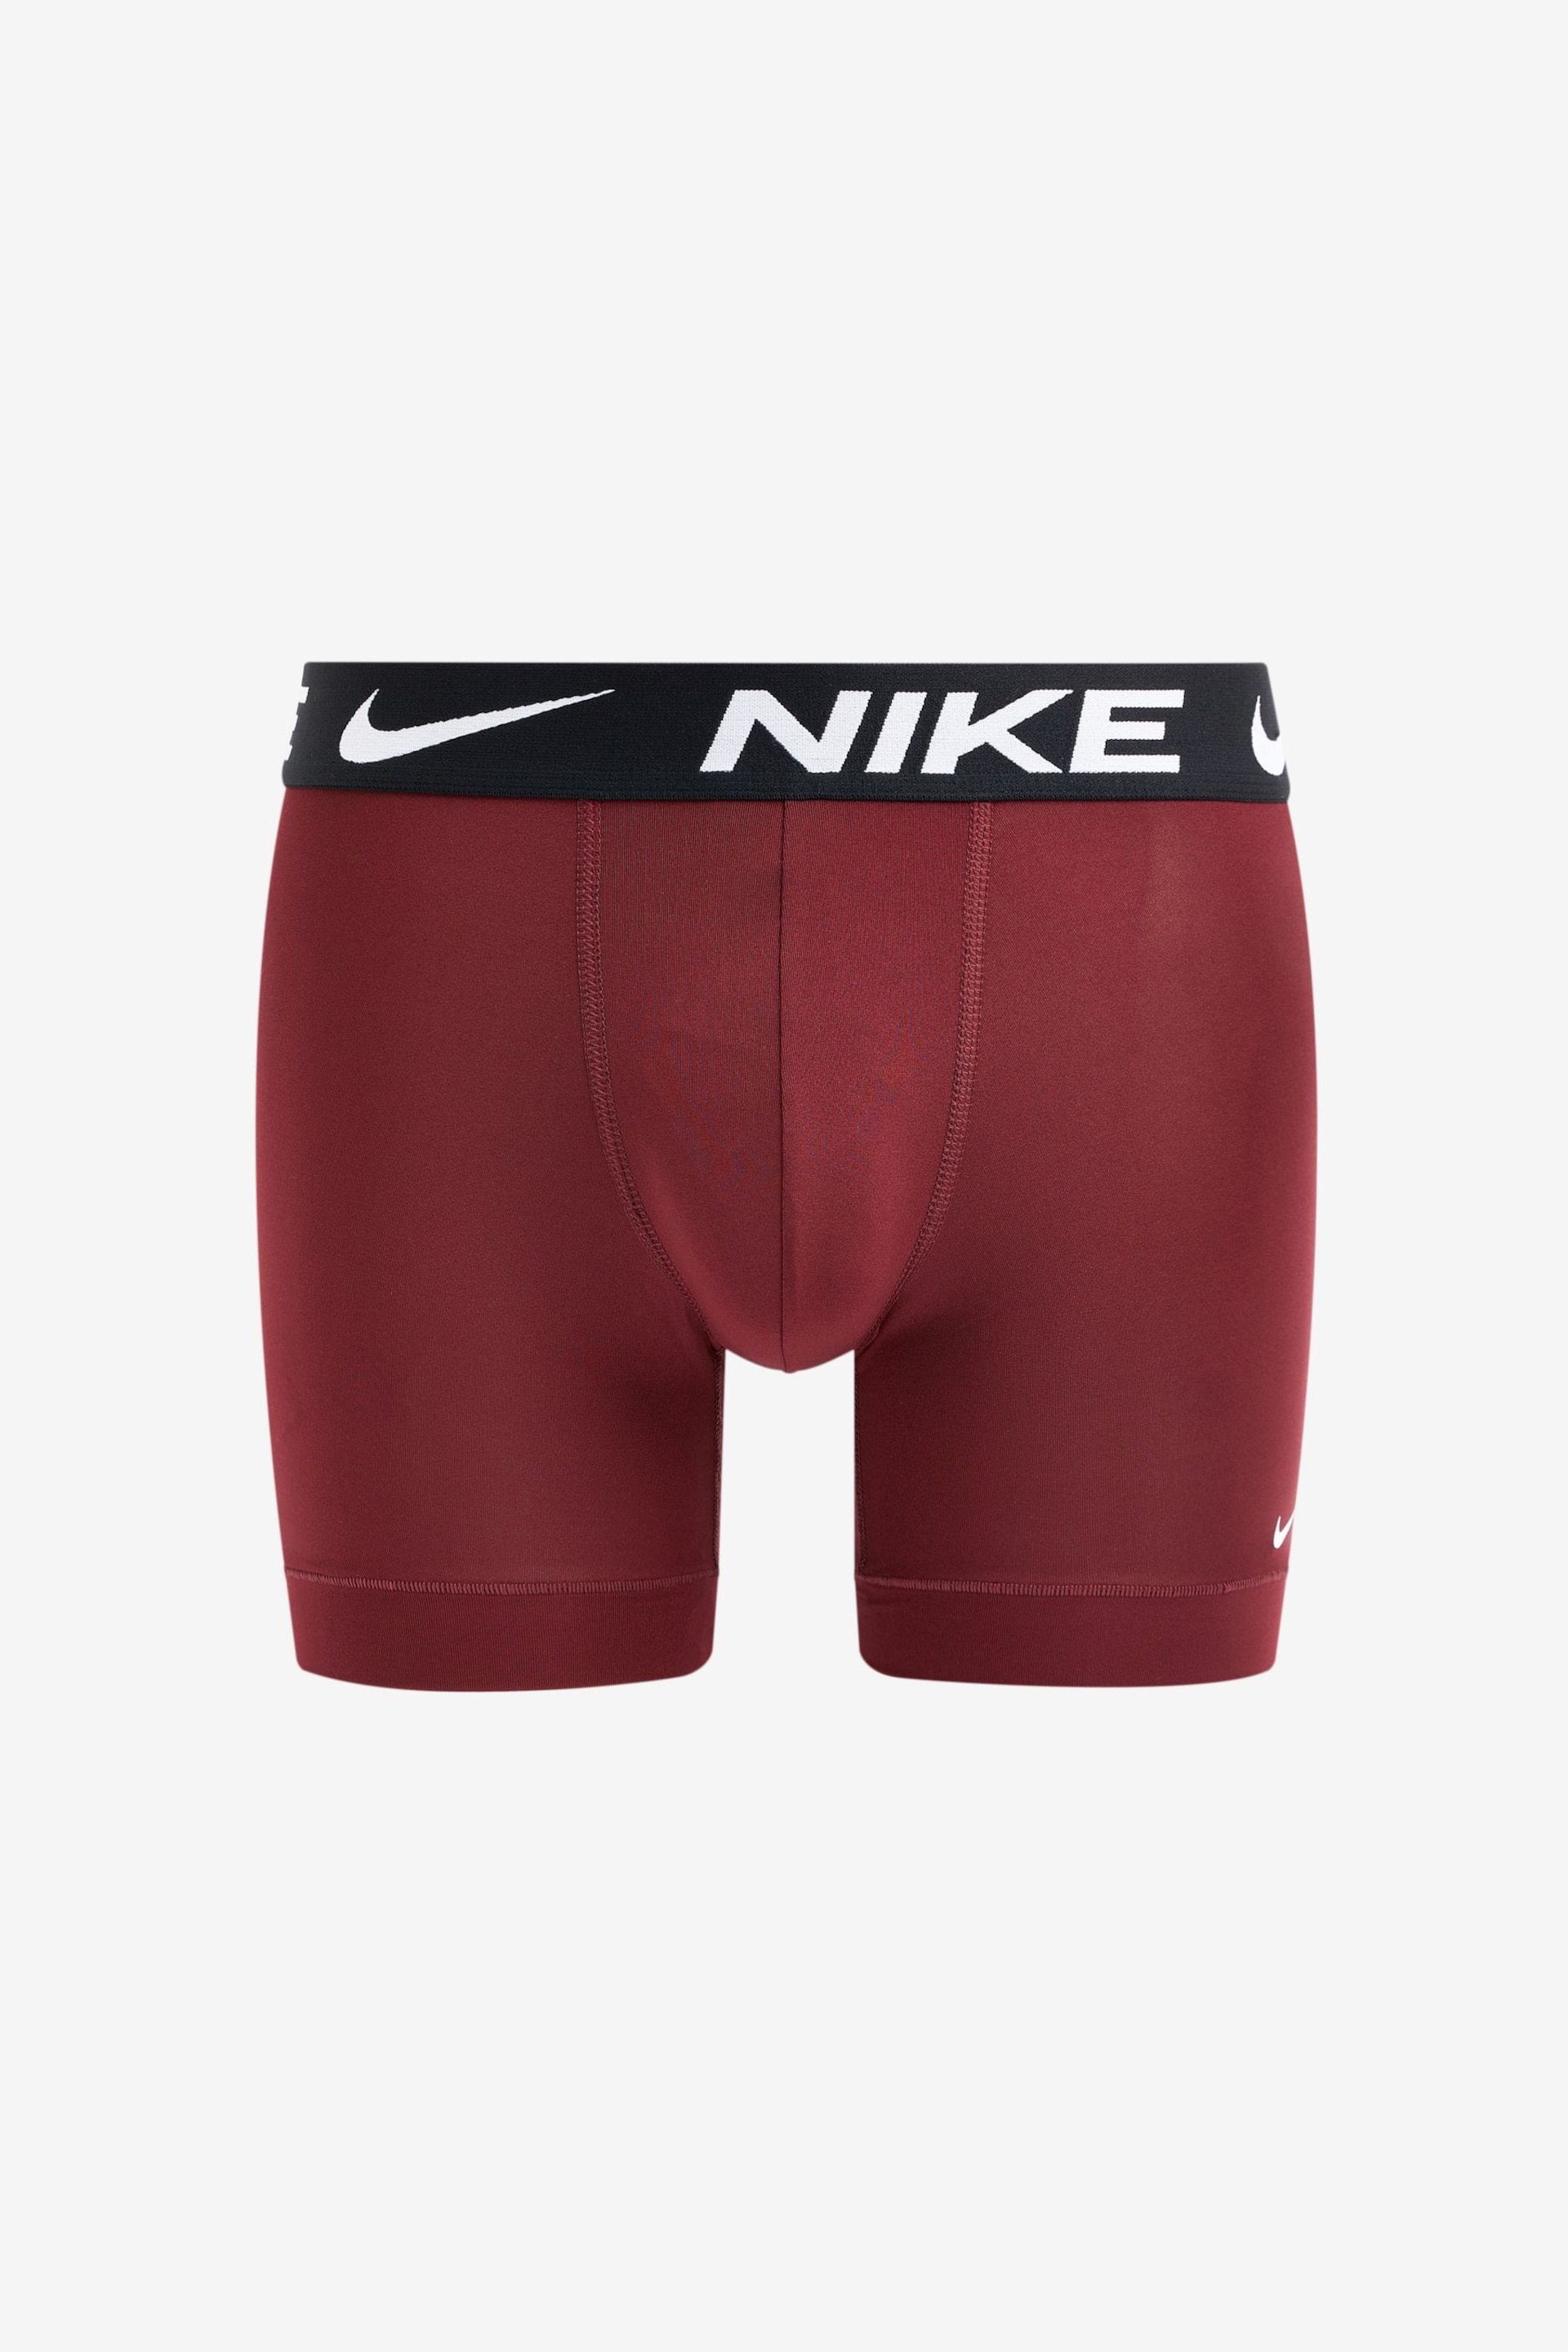 Nike Blue Boxer 3 Pack - Image 2 of 4